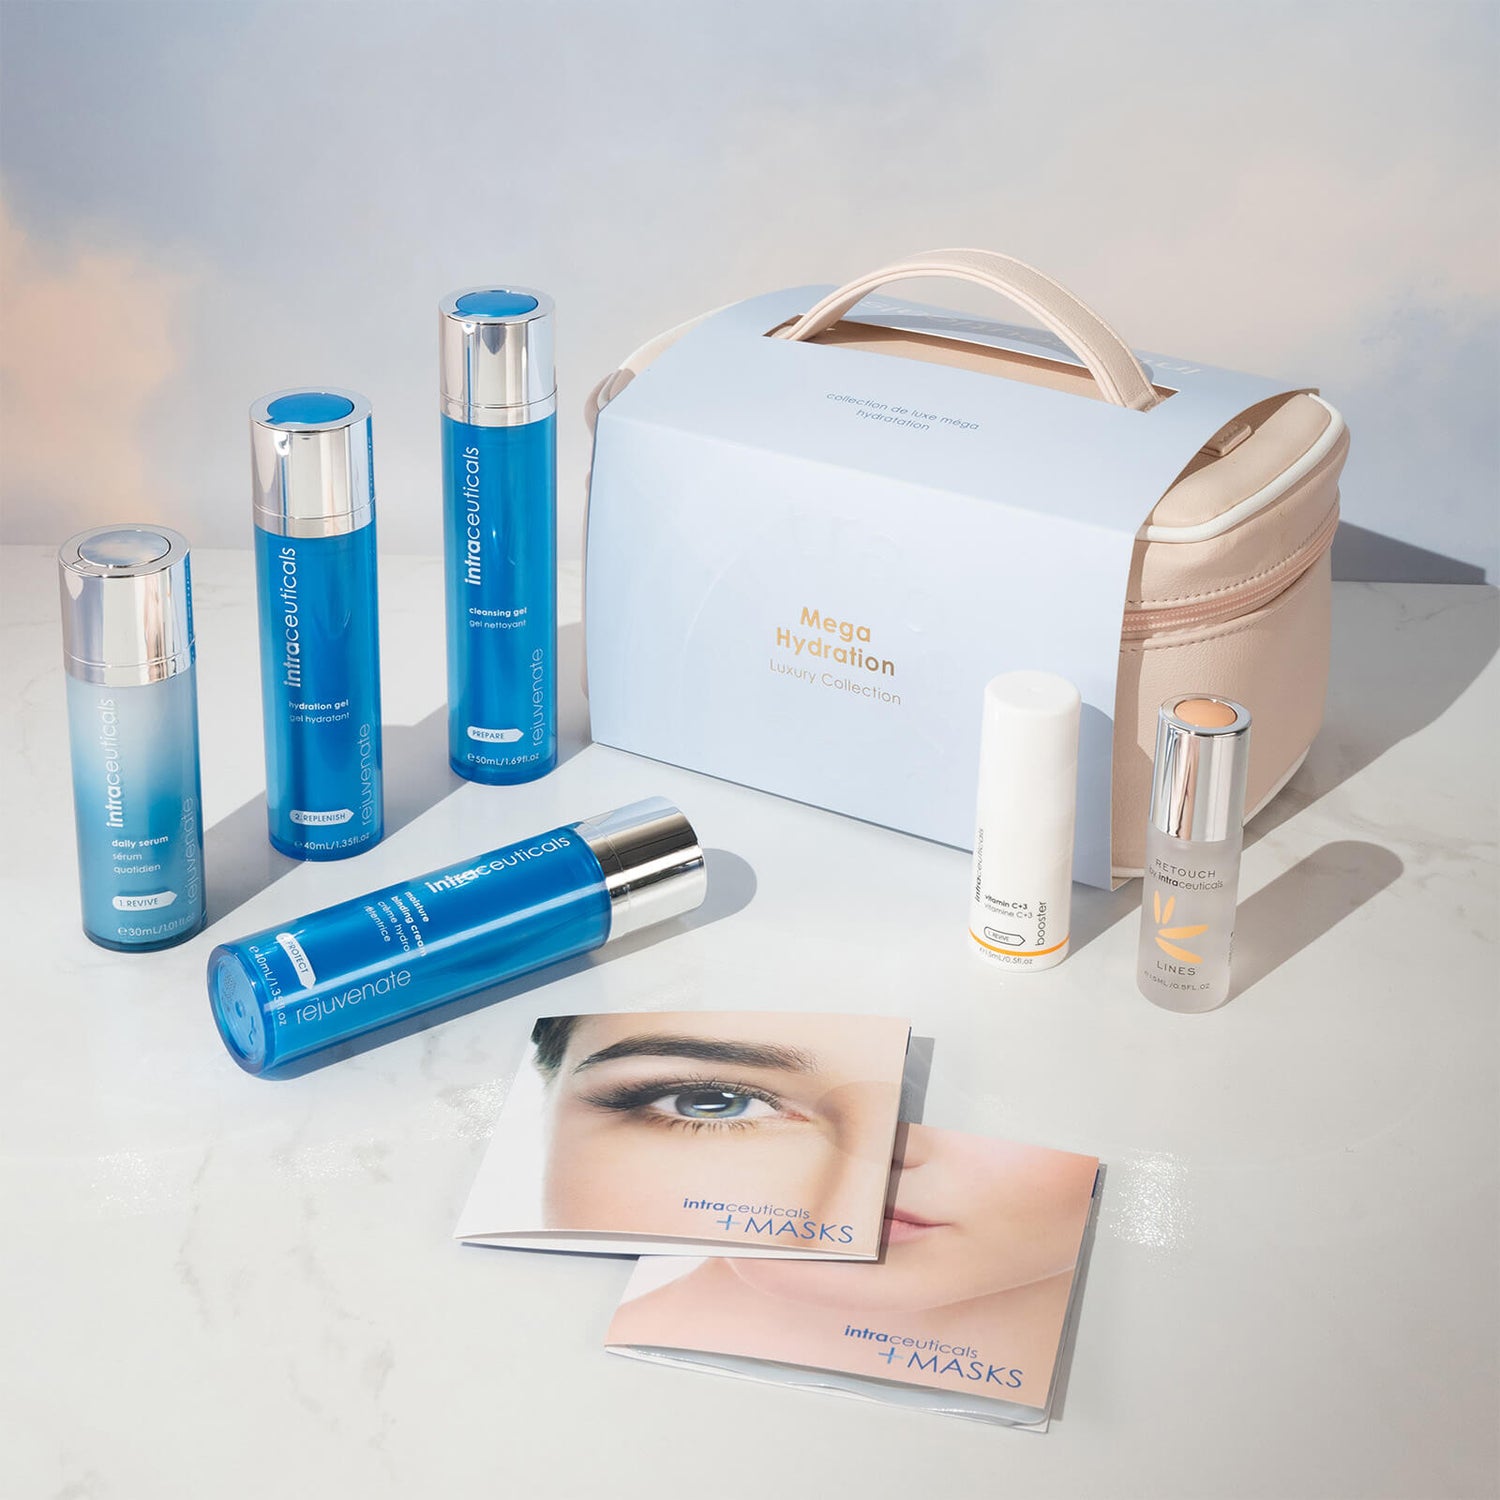 Intraceuticals Mega Hydration Luxury Collection (Worth $480.00)